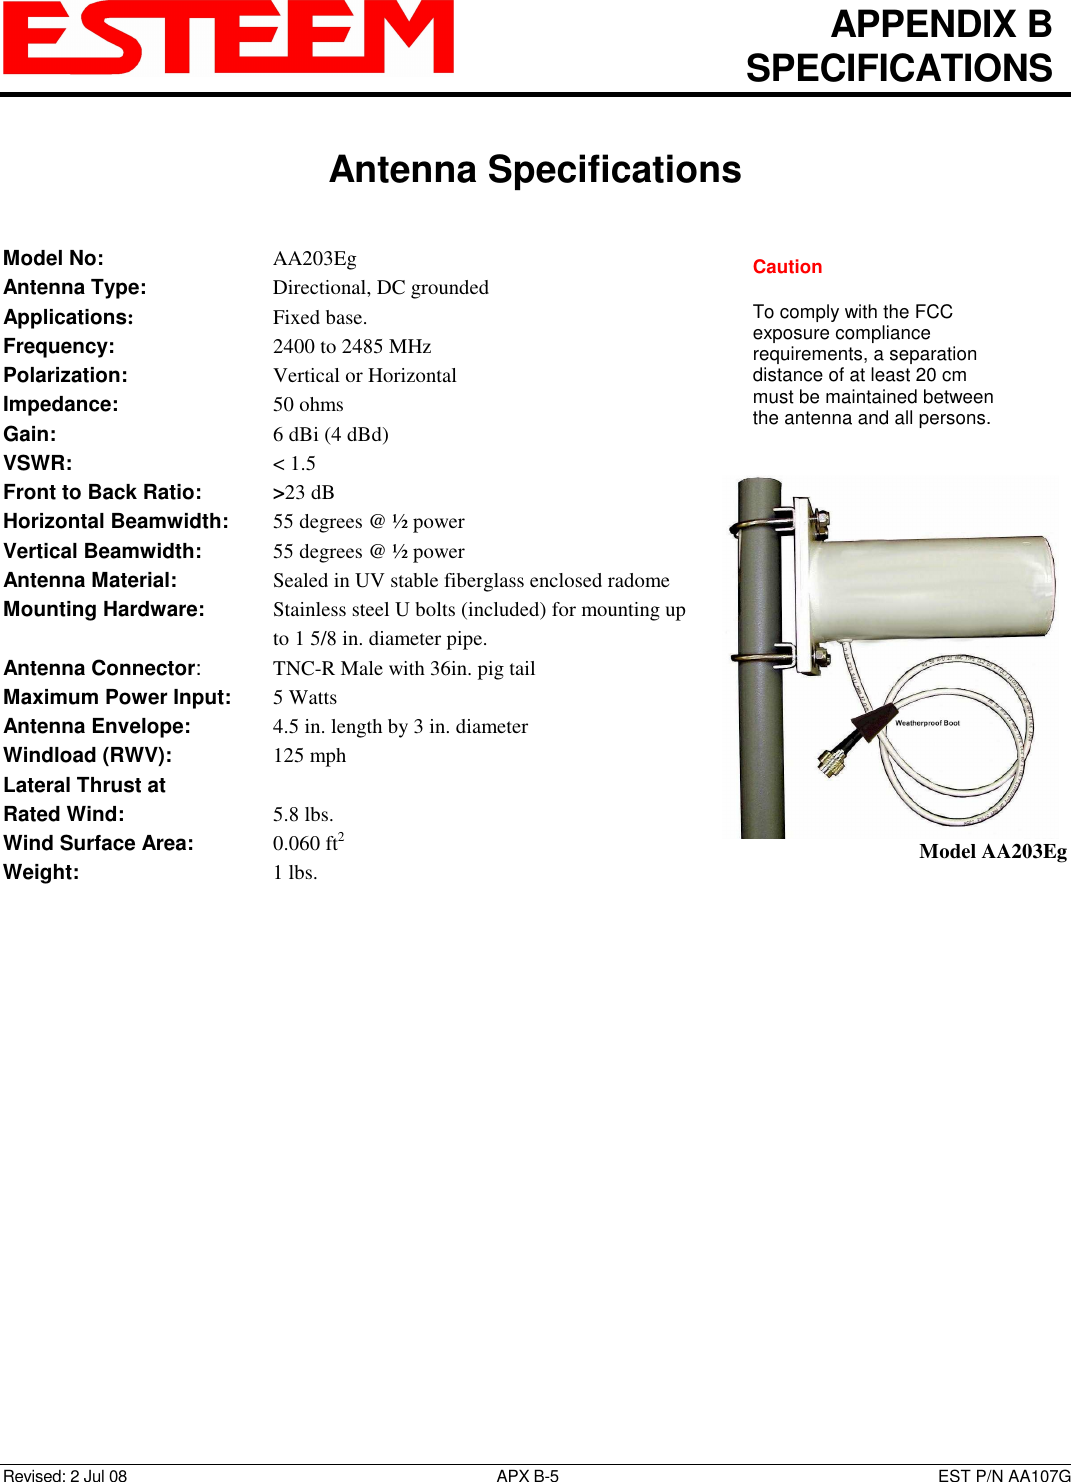   APPENDIX B   SPECIFICATIONS   Antenna Specifications   Revised: 2 Jul 08  APX B-5  EST P/N AA107G Model No:        AA203Eg Antenna Type:      Directional, DC grounded  Applications:       Fixed base. Frequency:        2400 to 2485 MHz  Polarization:        Vertical or Horizontal Impedance:        50 ohms Gain:          6 dBi (4 dBd) VSWR:          &lt; 1.5  Front to Back Ratio:    &gt;23 dB Horizontal Beamwidth:  55 degrees @ ½ power Vertical Beamwidth:      55 degrees @ ½ power Antenna Material:     Sealed in UV stable fiberglass enclosed radome  Mounting Hardware:      Stainless steel U bolts (included) for mounting up to 1 5/8 in. diameter pipe. Antenna Connector:    TNC-R Male with 36in. pig tail Maximum Power Input:  5 Watts Antenna Envelope:    4.5 in. length by 3 in. diameter Windload (RWV):      125 mph Lateral Thrust at  Rated Wind:        5.8 lbs. Wind Surface Area:    0.060 ft2 Weight:          1 lbs.      Model AA203Eg Caution  To comply with the FCC exposure compliance requirements, a separation distance of at least 20 cm must be maintained between the antenna and all persons. 